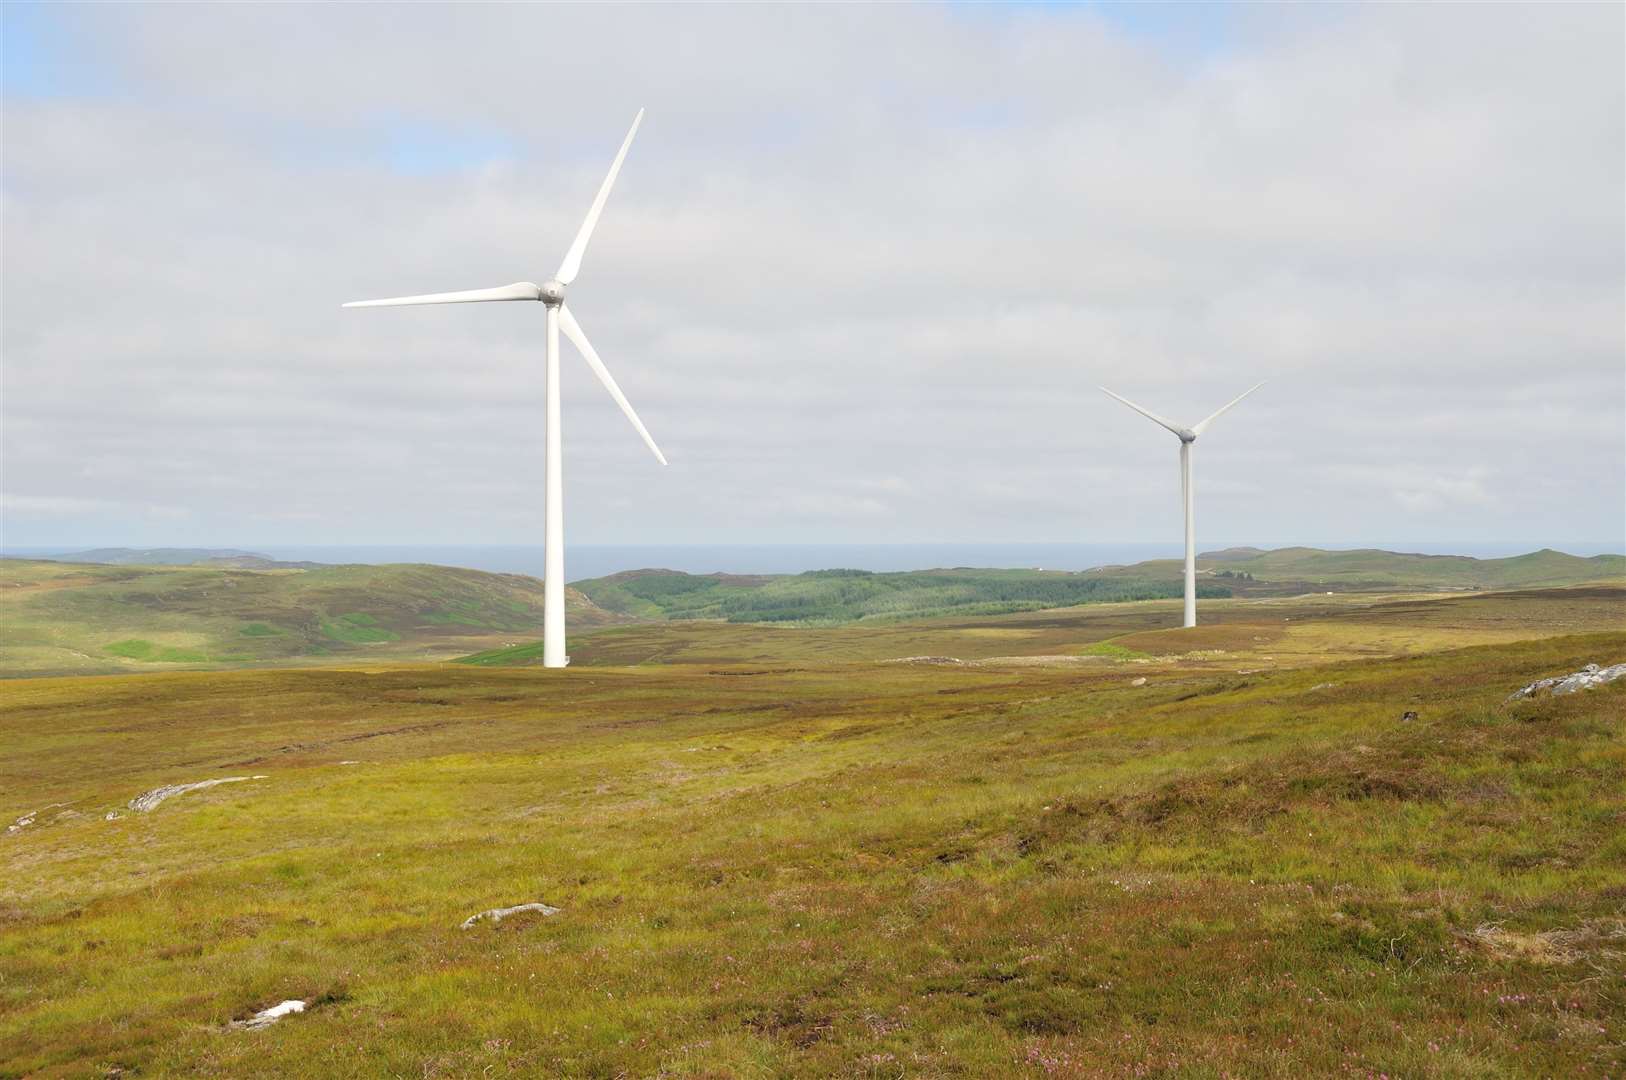 The existing Bettyhill Wind Farm has two turbines but 11 more are planned.